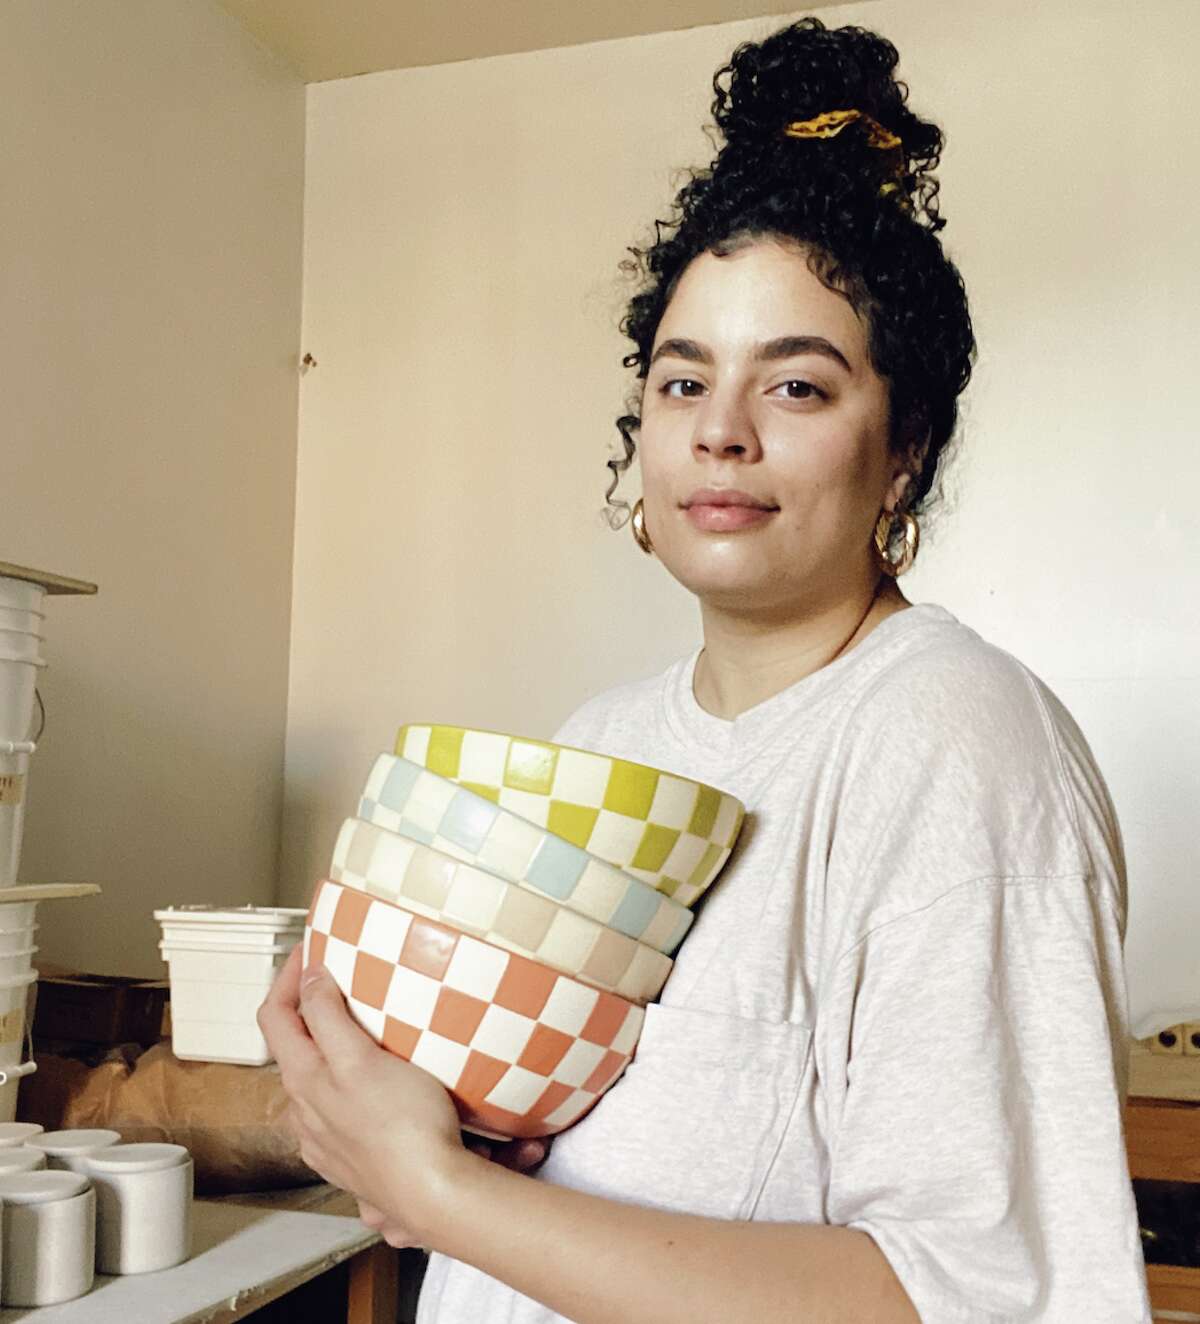 “Why do it a certain way if you’re not happy?” the SUNY New Paltz-trained ceramicist Alexis Tellefsen asks. “I think people need to be a little softer on themselves ... It’s OK to listen to your body and brain and take time to rest, because you need rest. That is productive.”